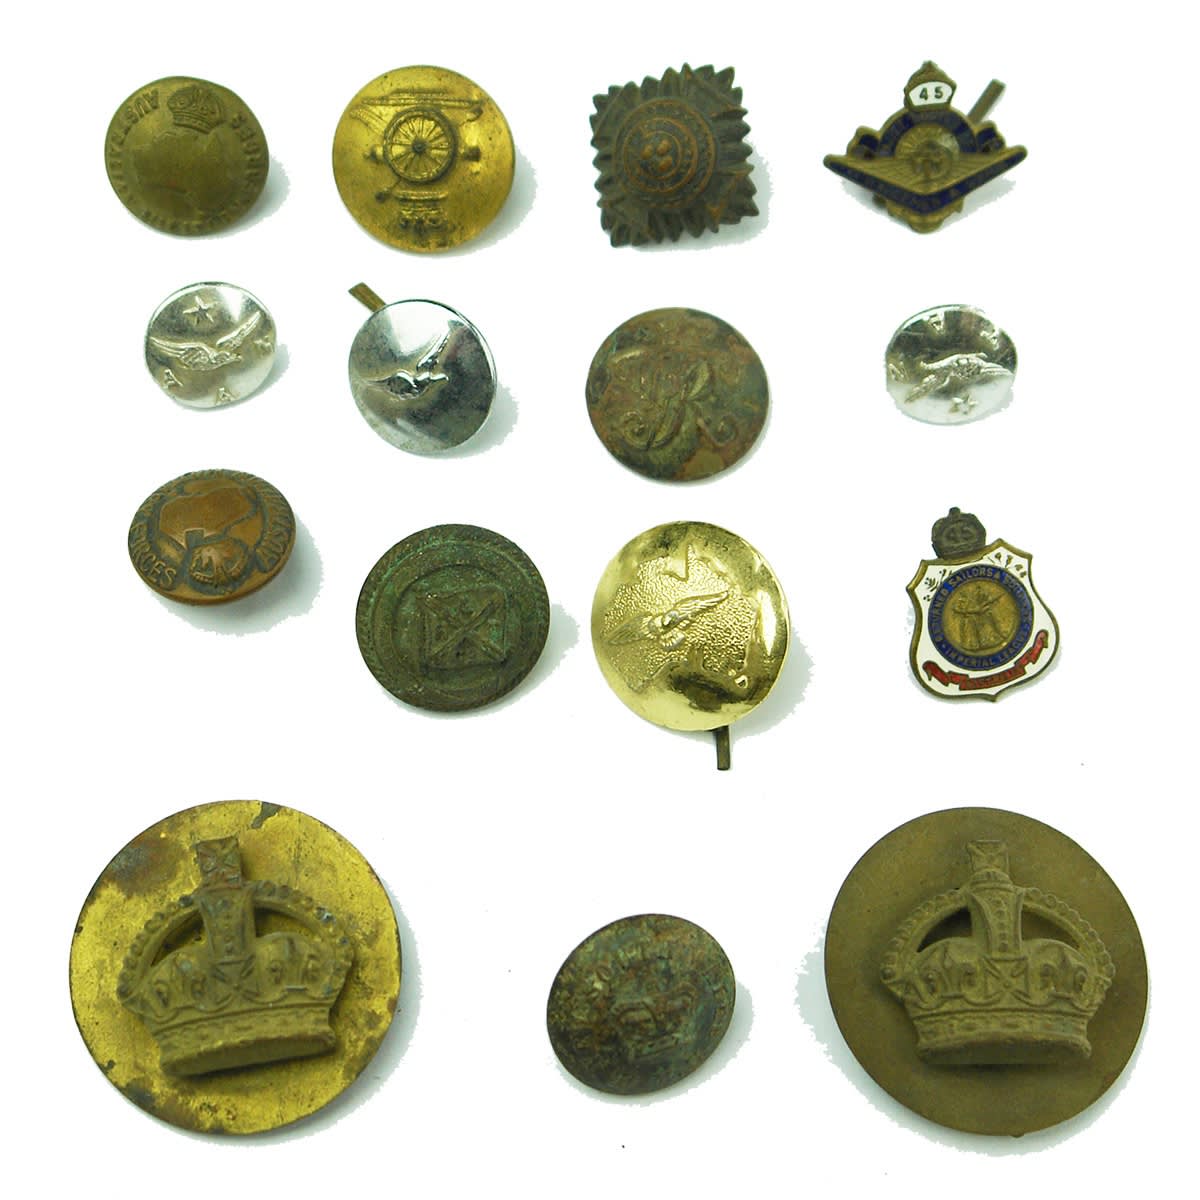 Miscellaneous. 15 early buttons and badges including military and shipping.